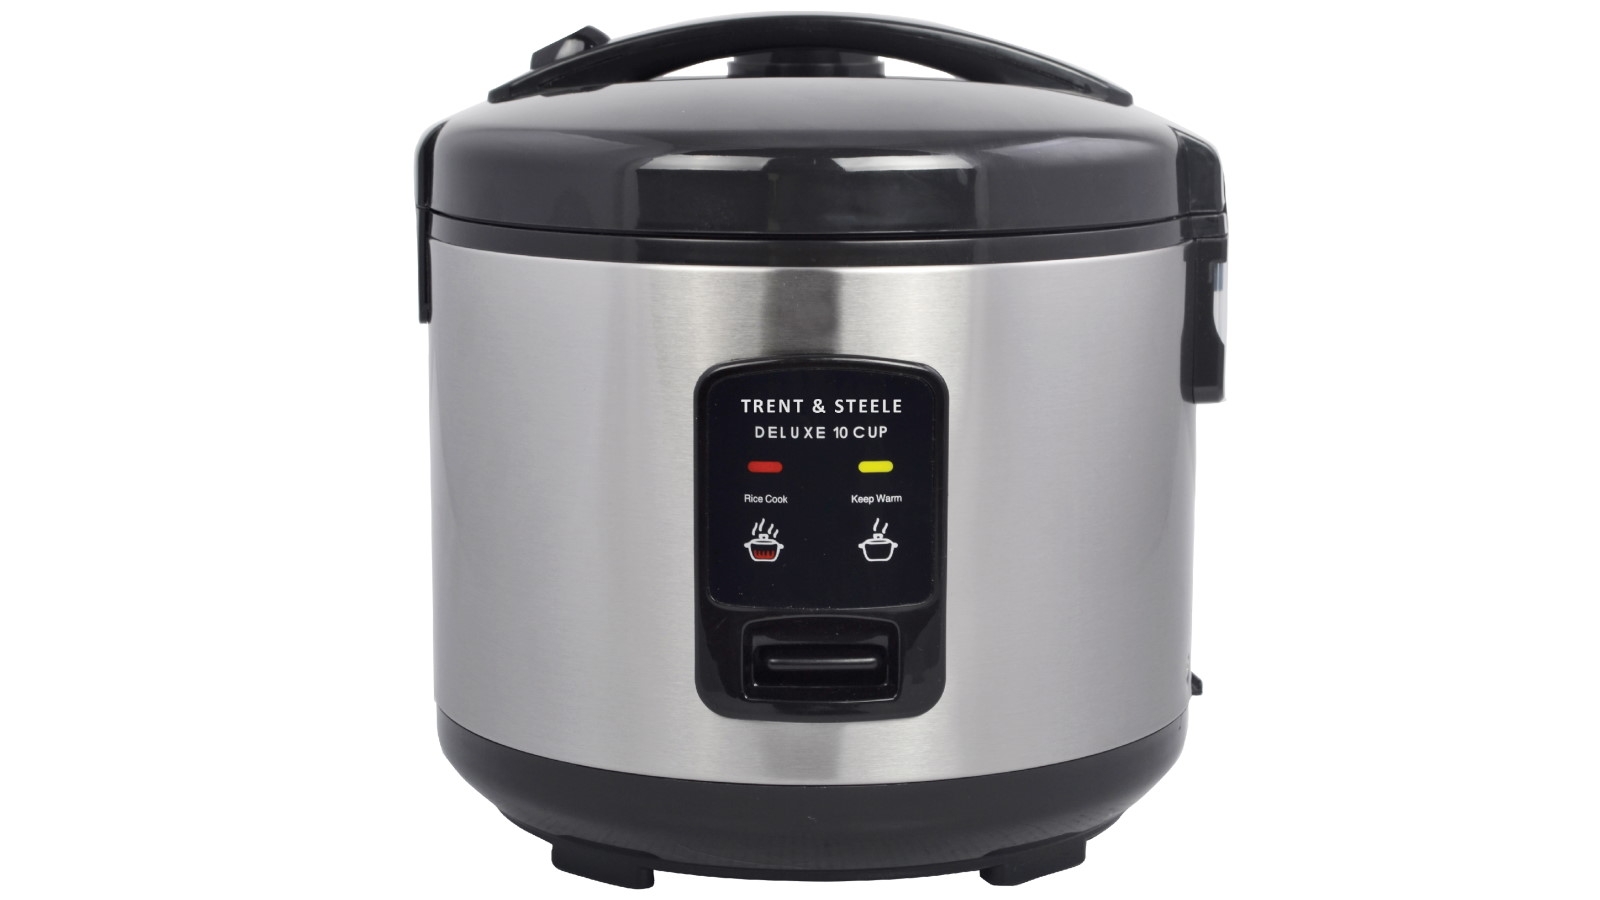 Trent & Steele Delux 10 Cup Rice Cooker | Joyce Mayne